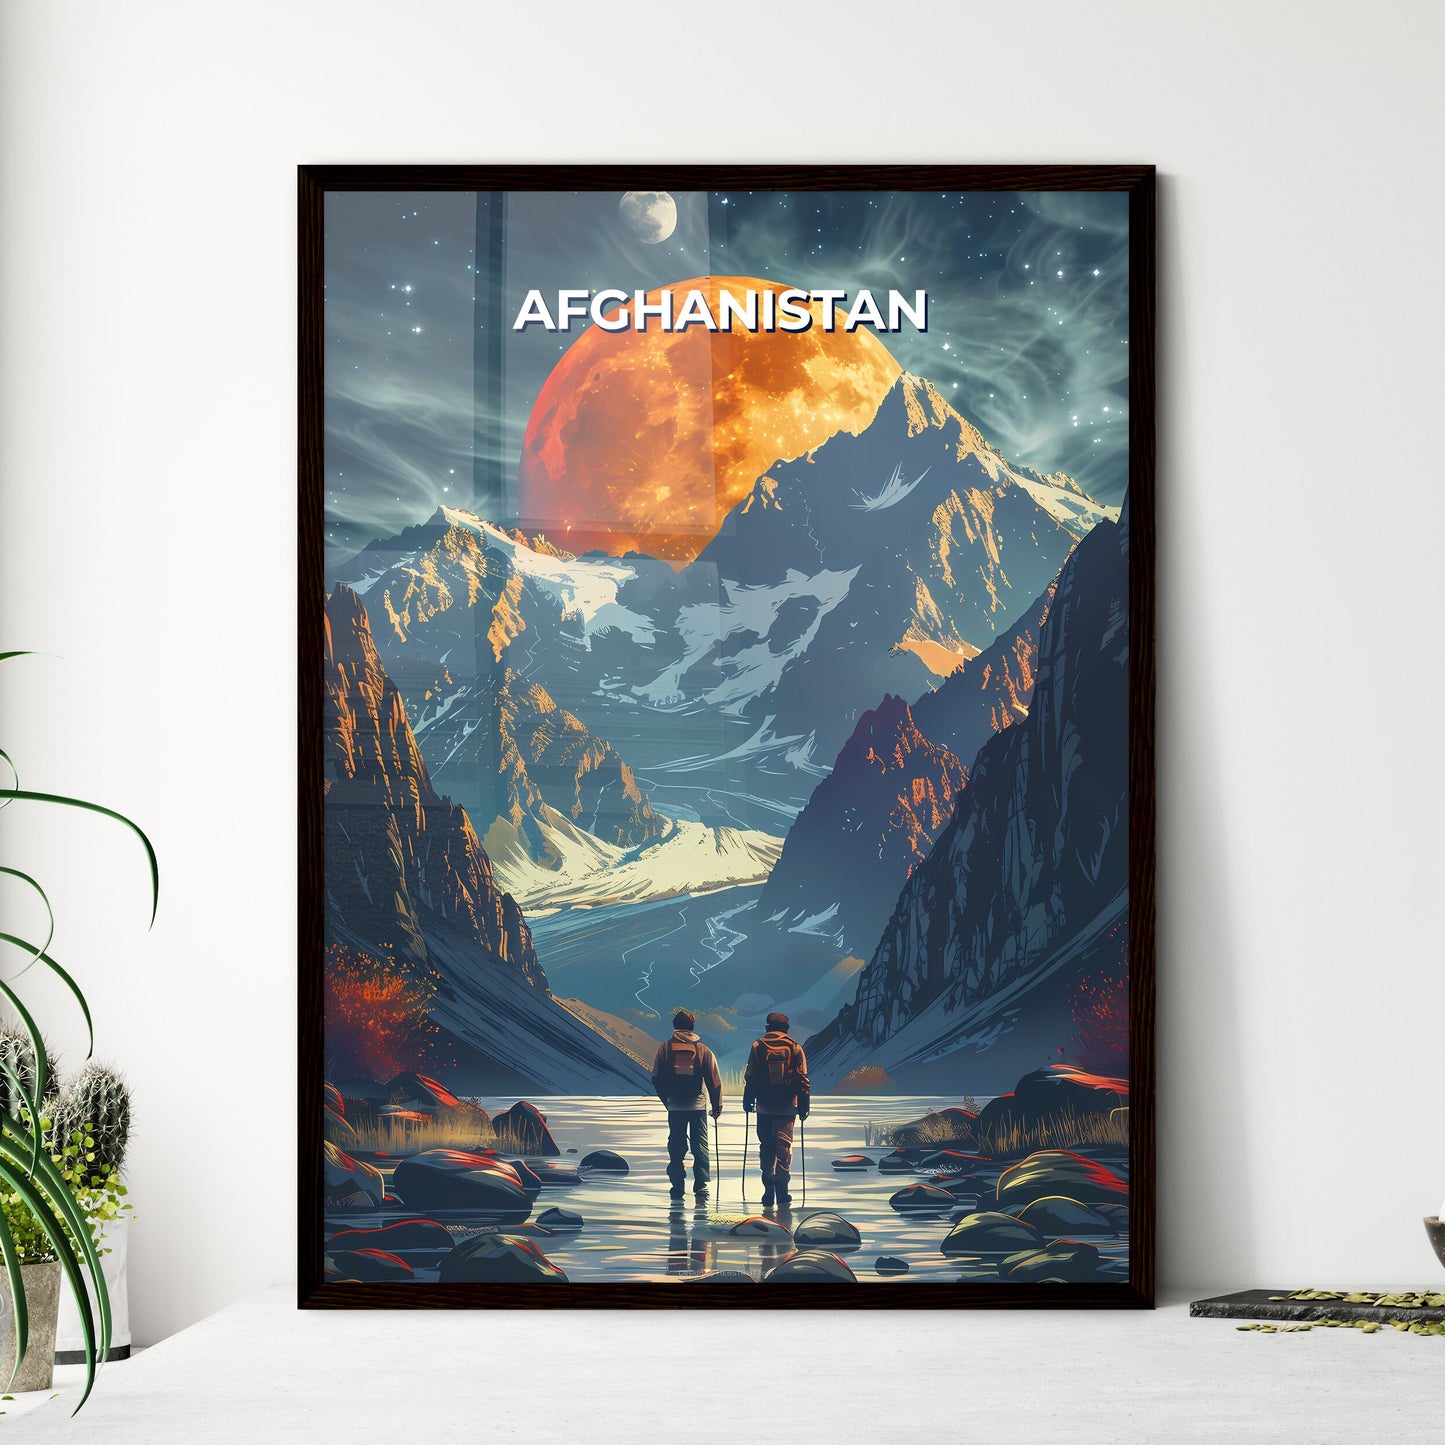 Vibrant Afghanistan Painting Showcasing a Mountain Range and Two Figures